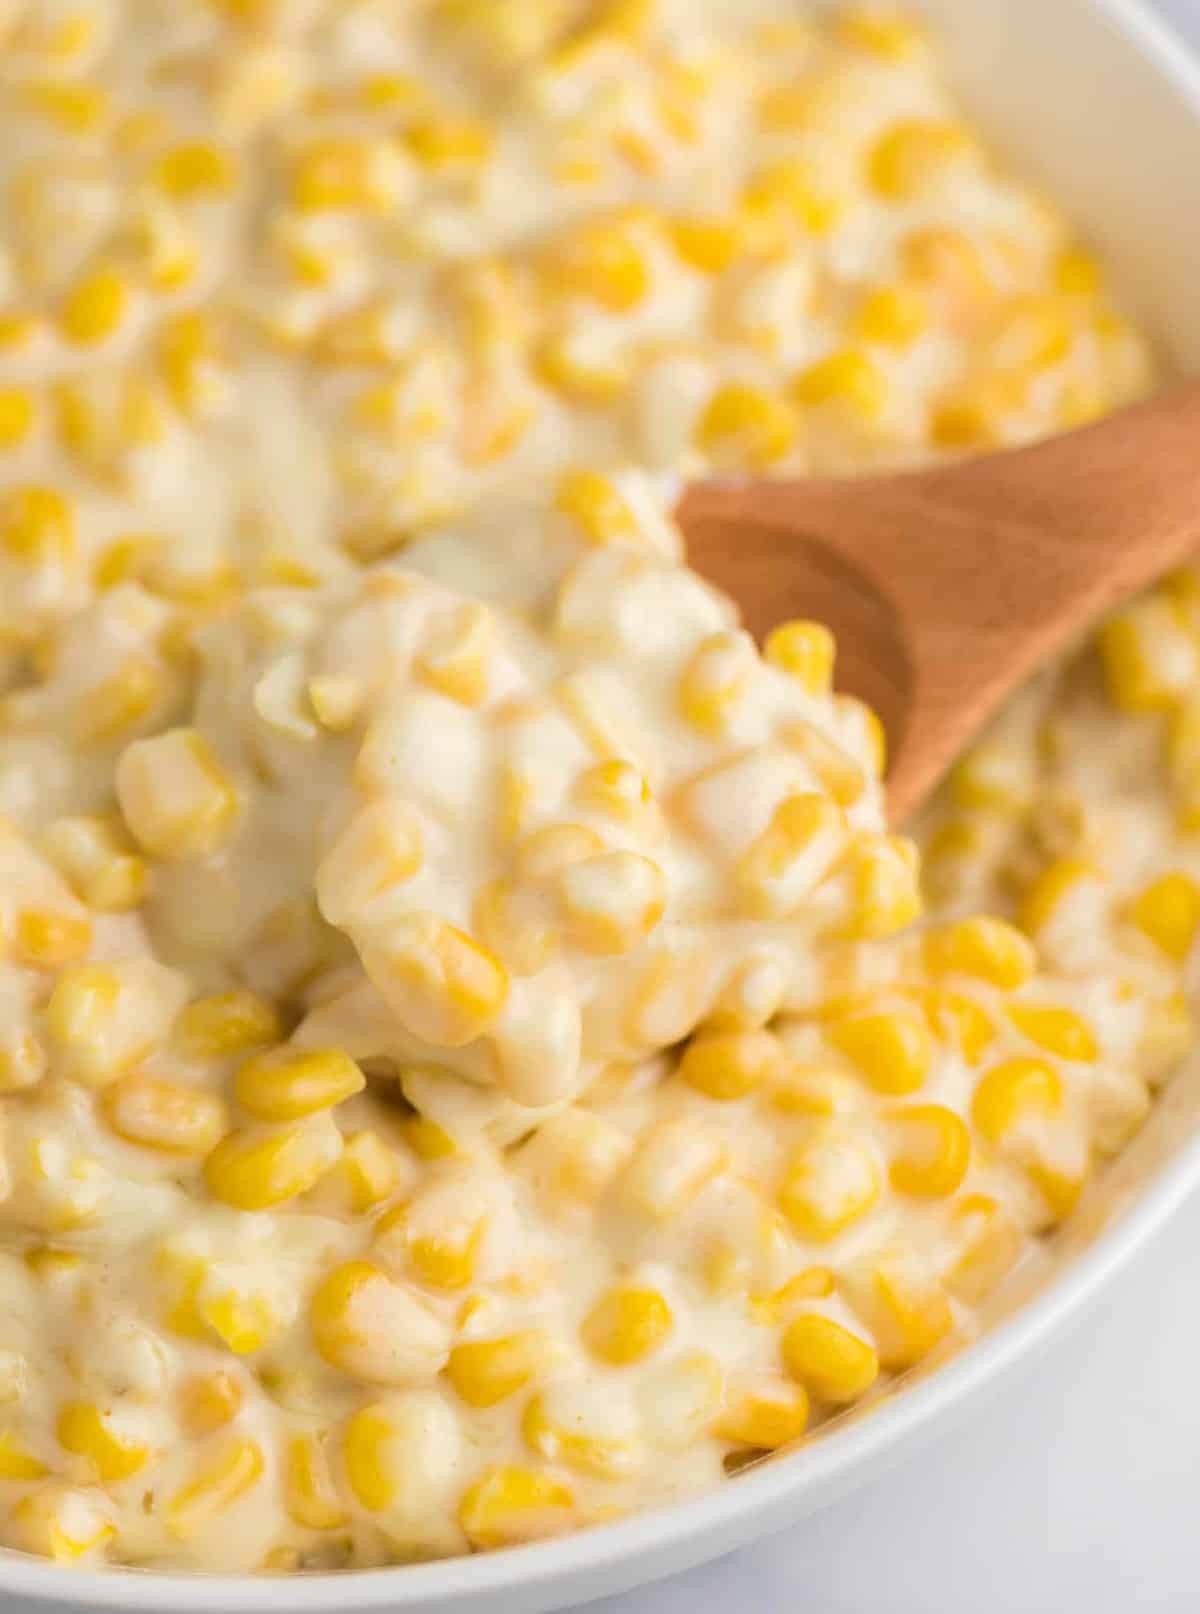 a wooden spoon taking a scoop of creamed corn